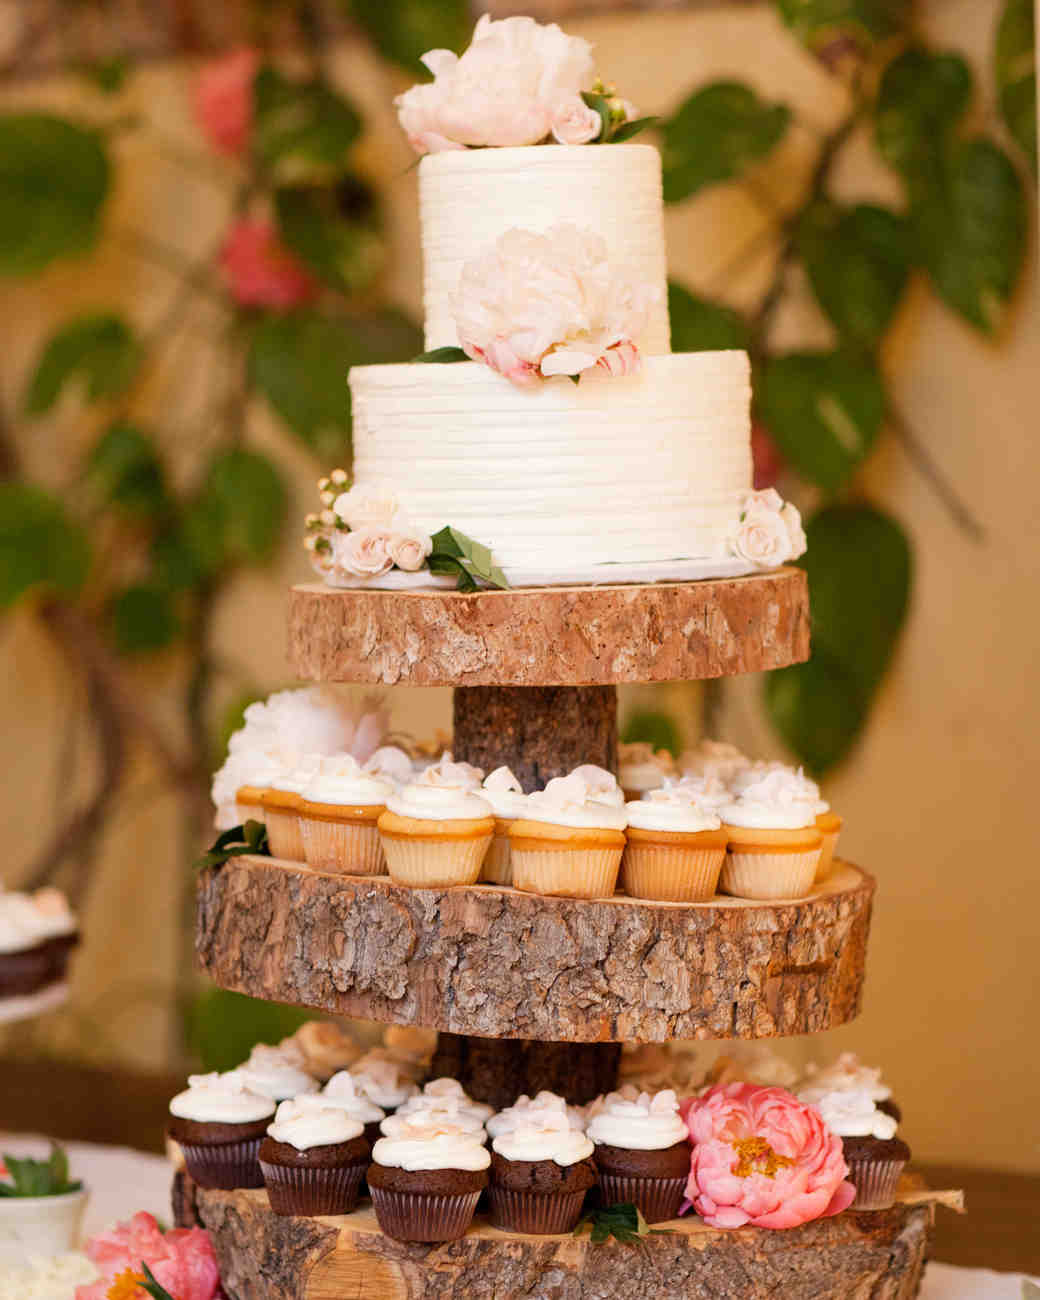 These unique wedding cakes are perfect for a contemporary wedding—but are just as appropriate for couples looking to switch things up come the dessert hour.